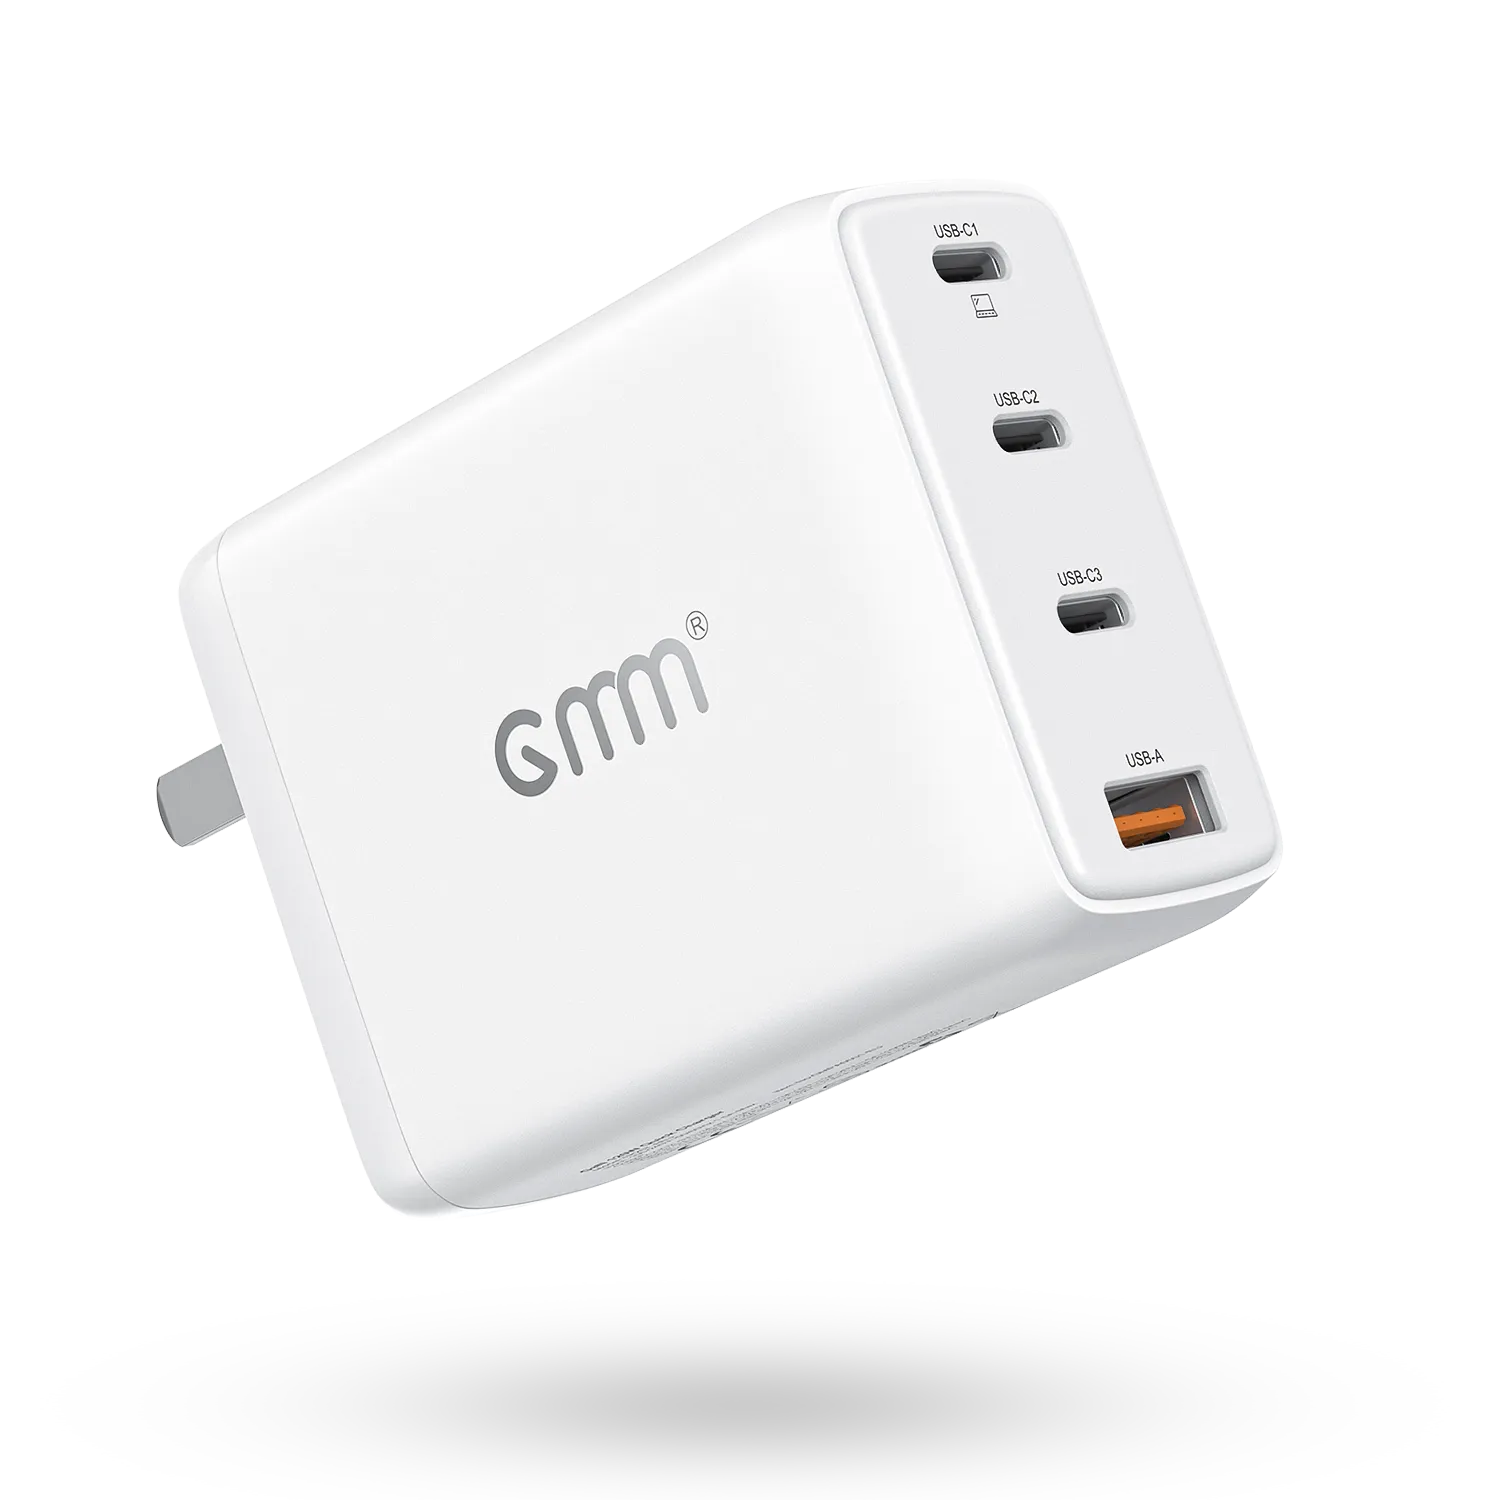 GMM 120W USB C Charger for MacBooks iPhone